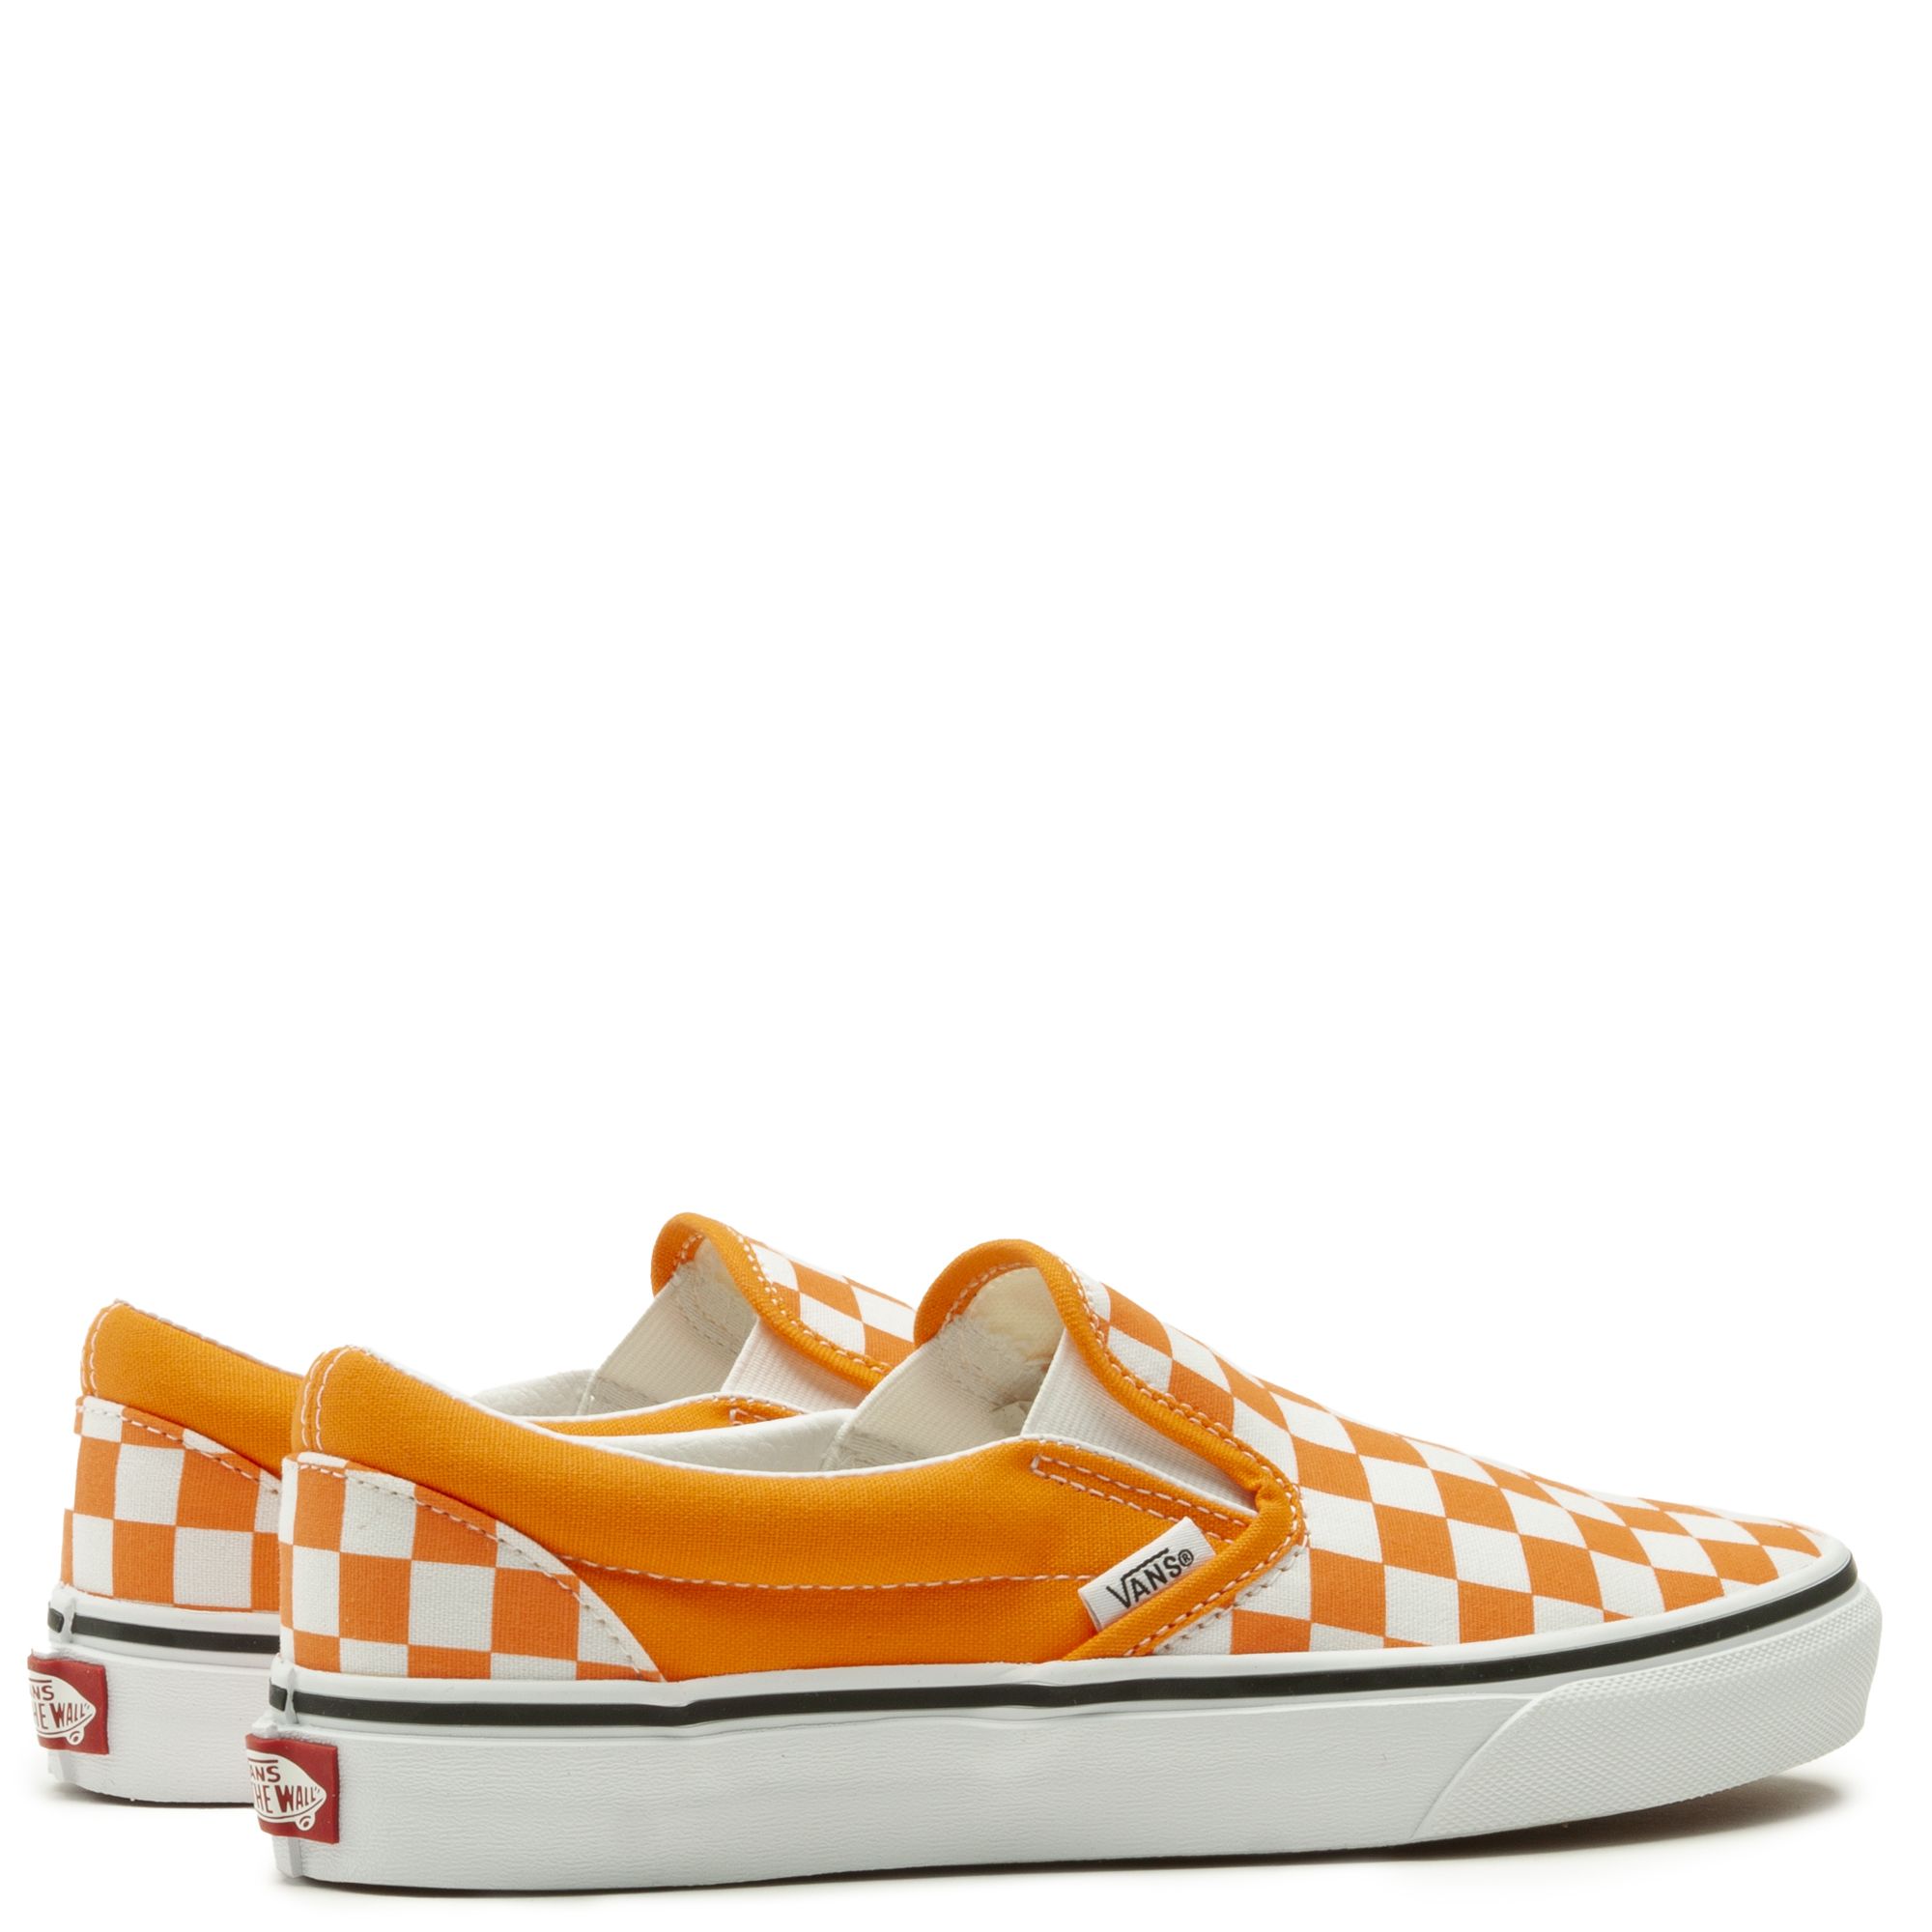 VANS Yellow & White Checkered Slip On Sneakers Kids US Size 7